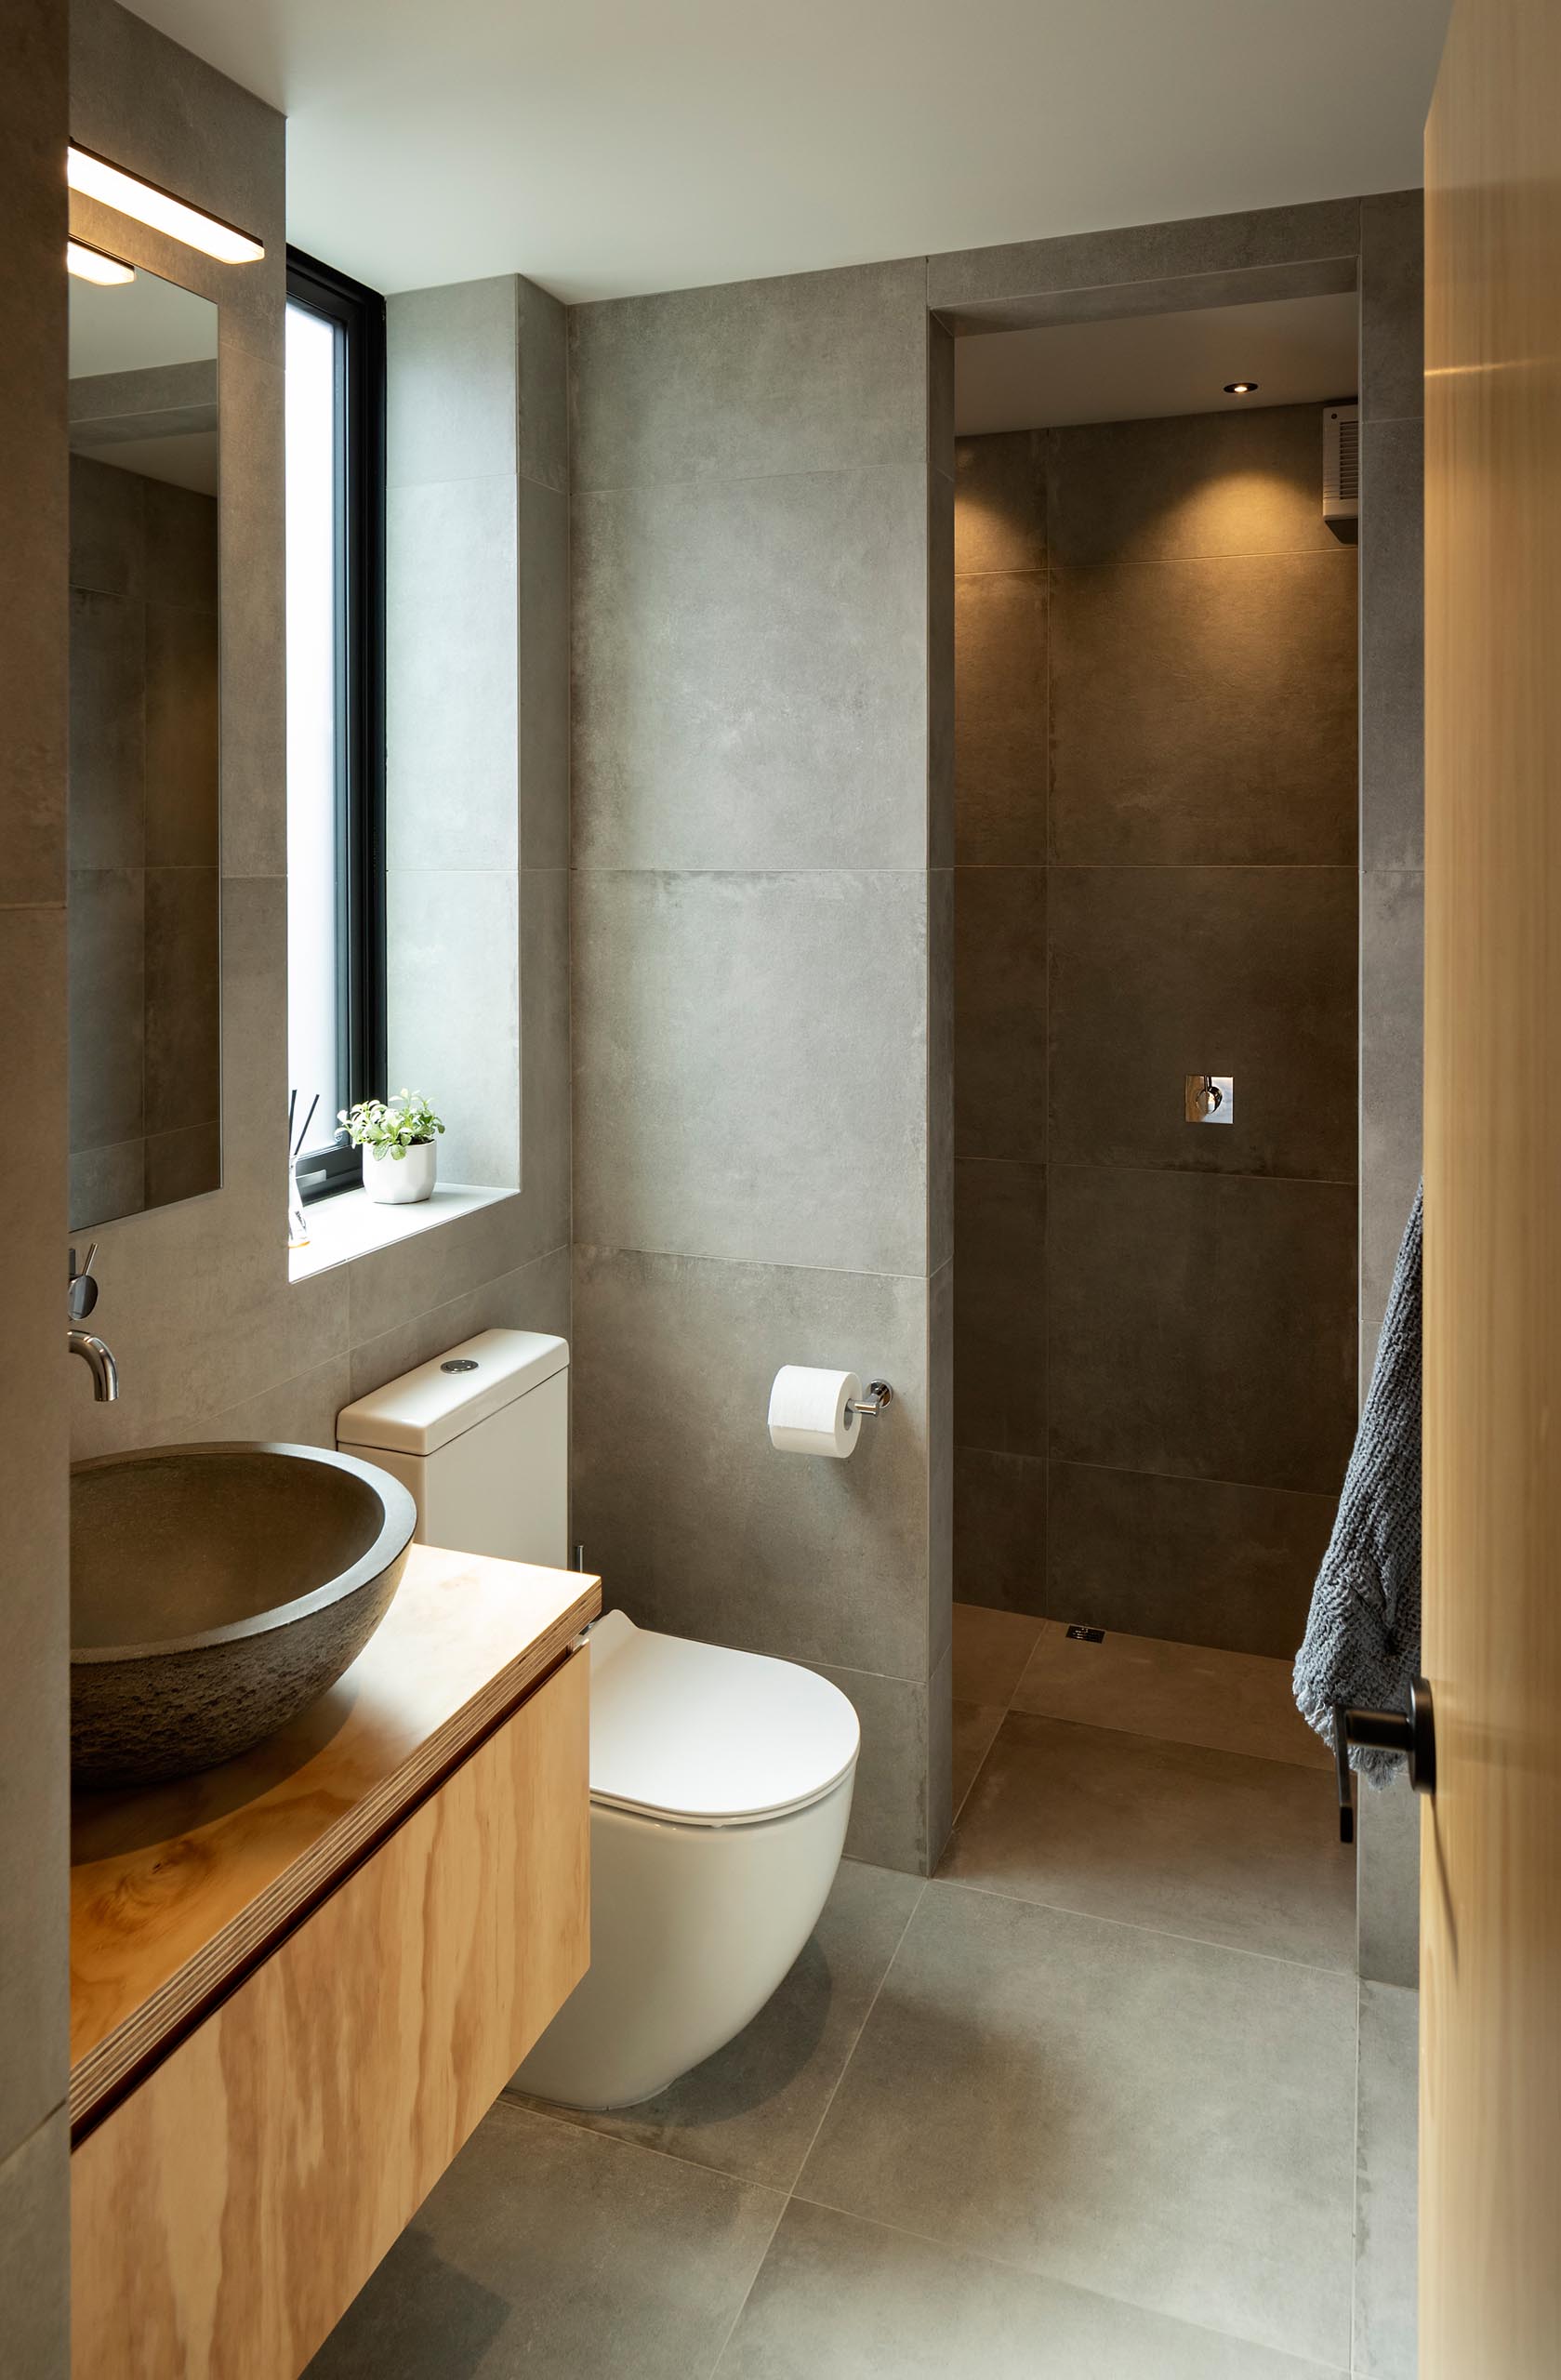 A modern bathroom reminiscent of a Japanese spa with floor to ceiling, stone-look tiles.